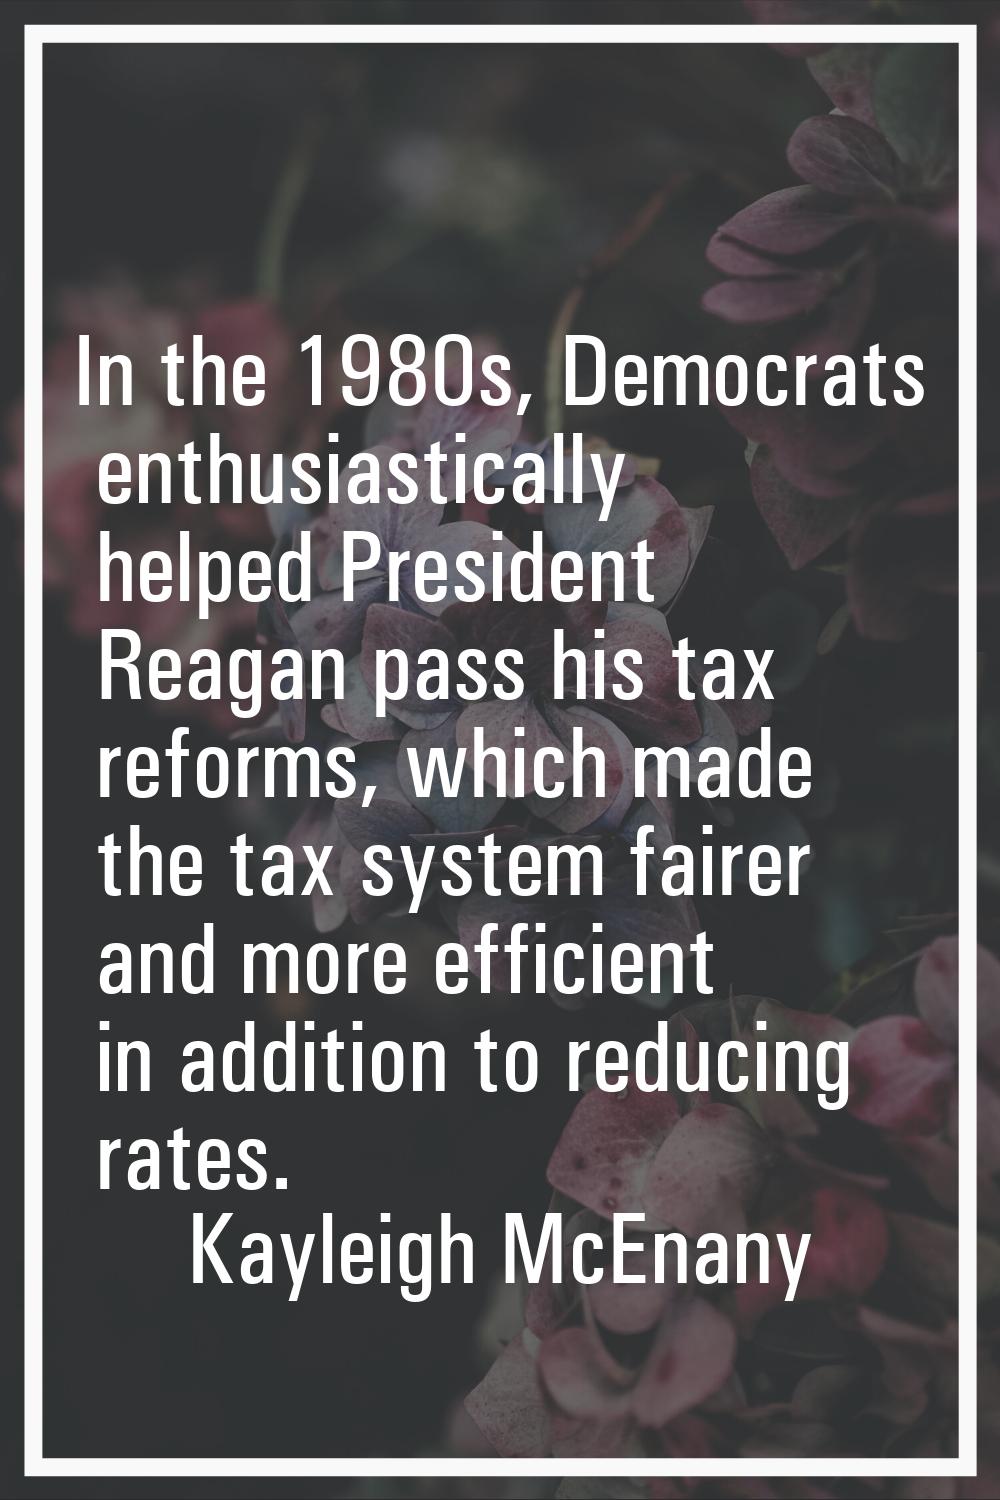 In the 1980s, Democrats enthusiastically helped President Reagan pass his tax reforms, which made t